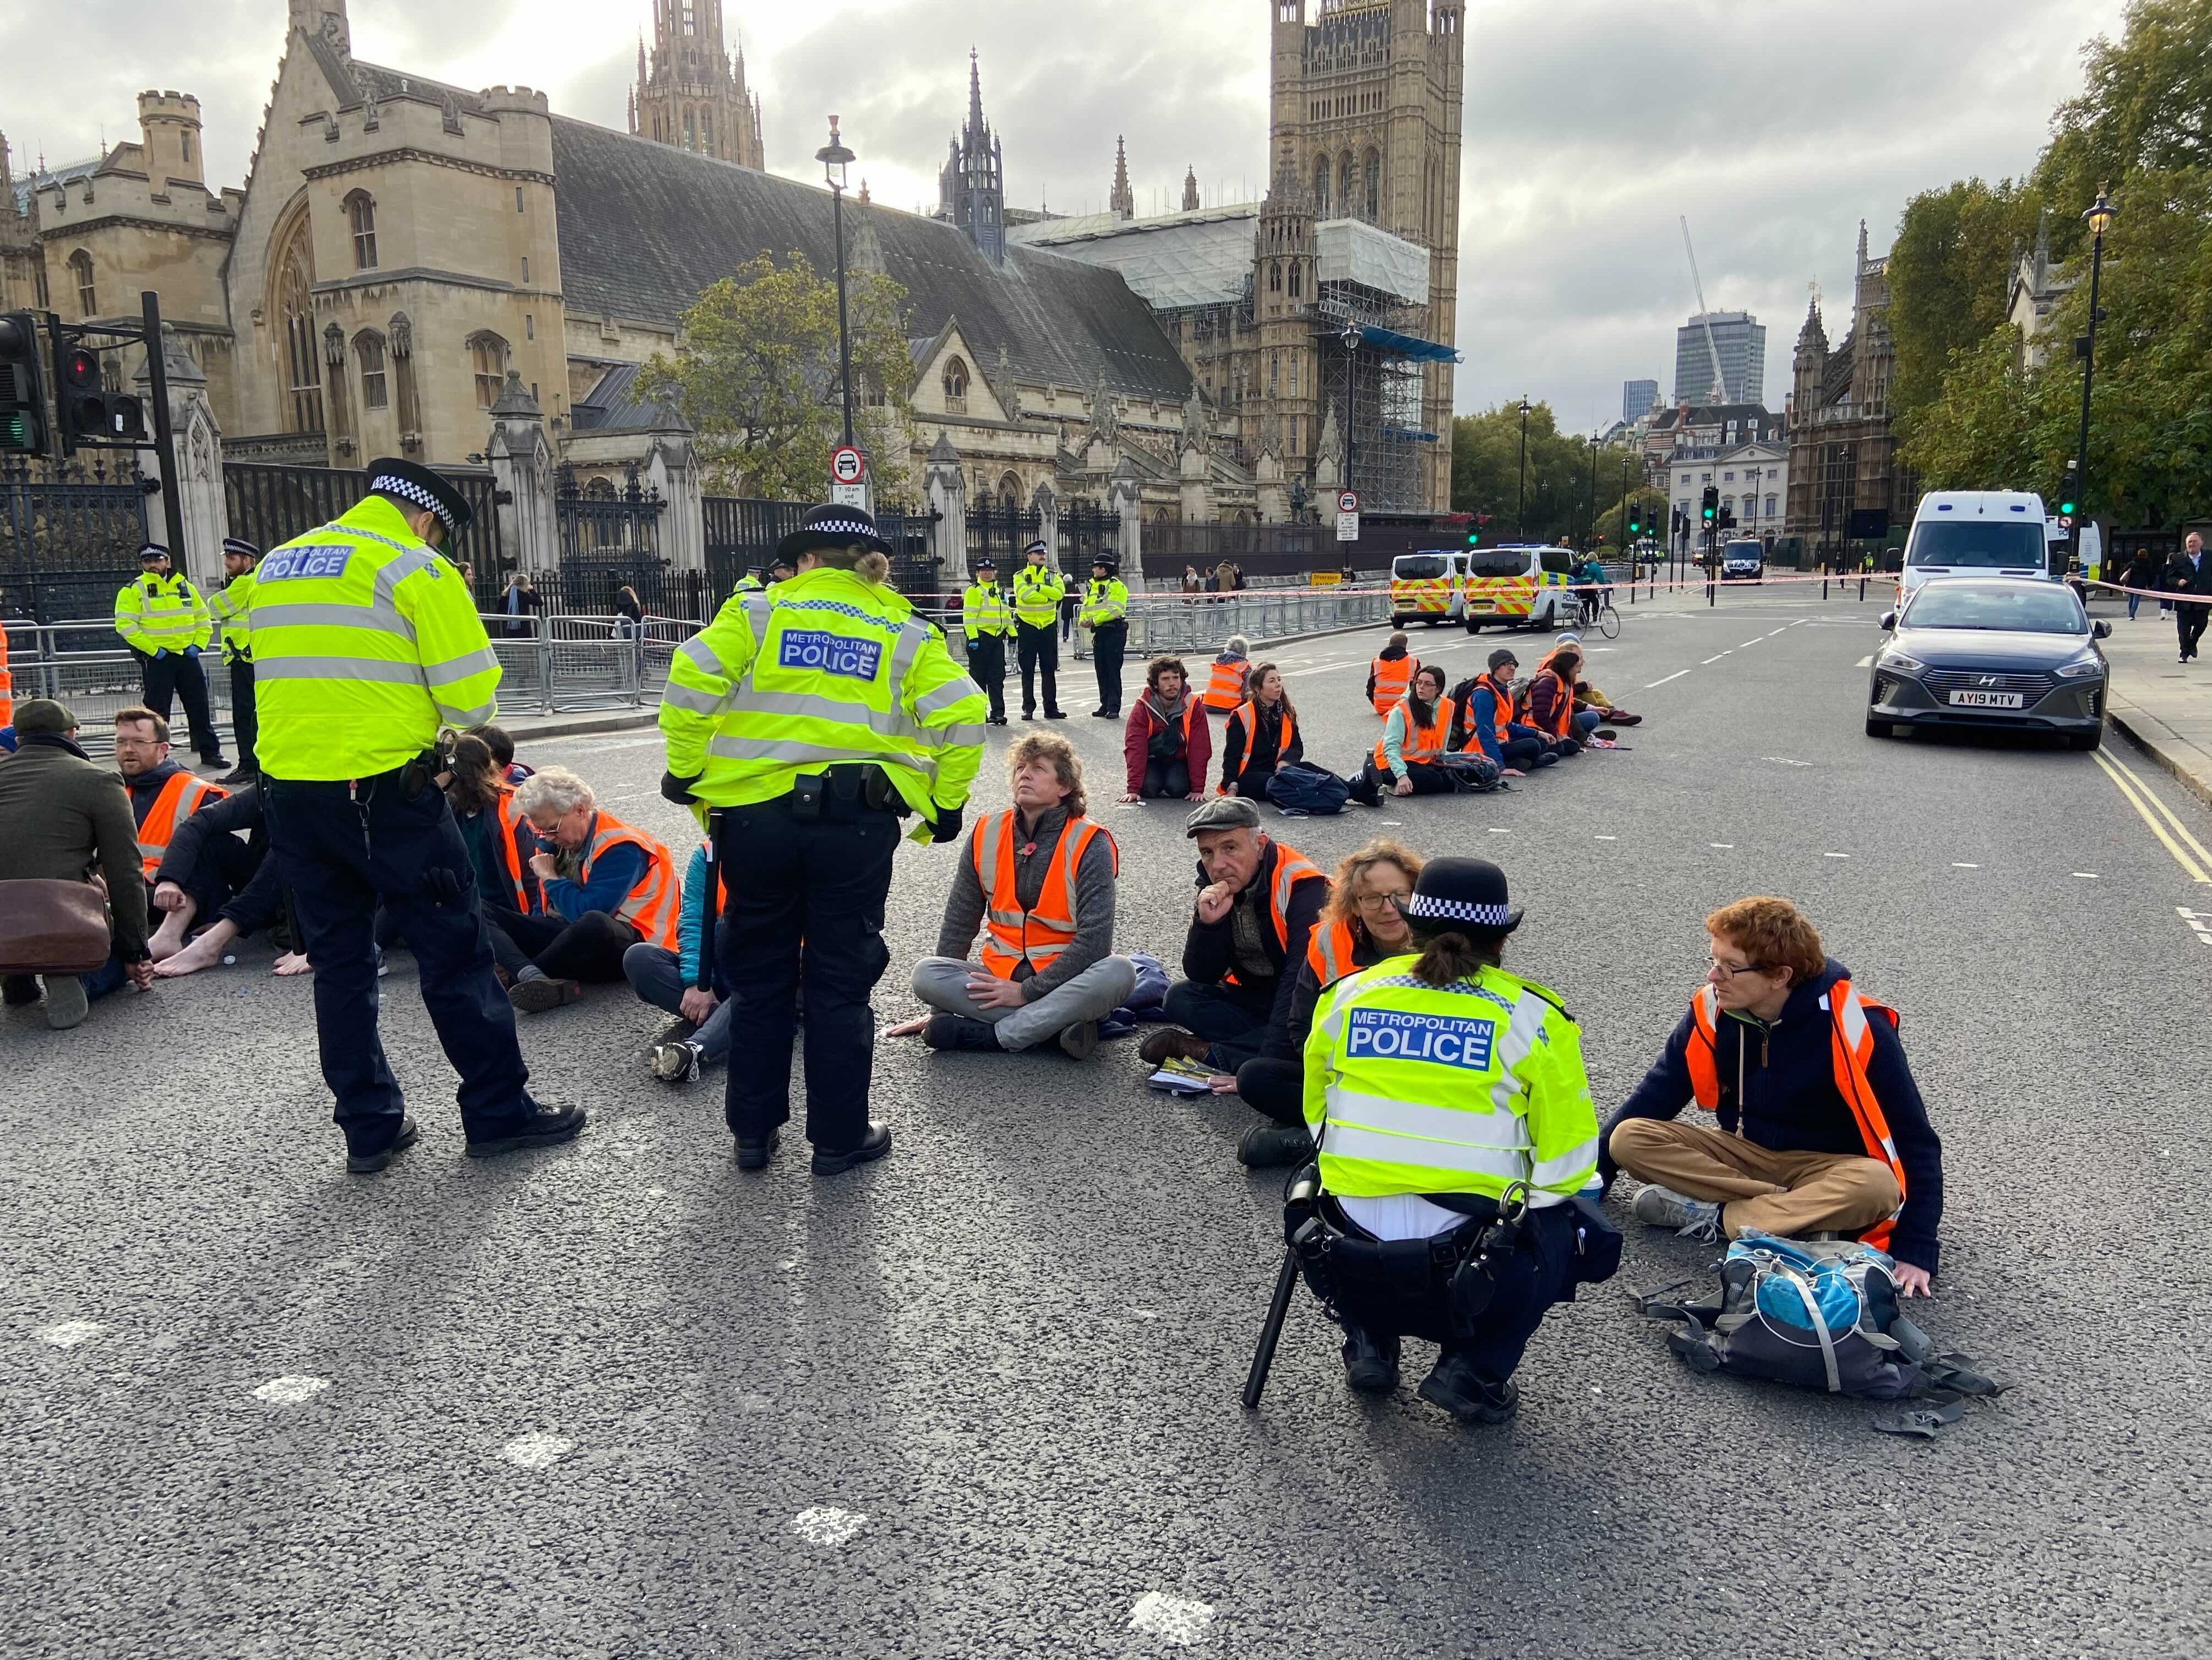 Insulate Britain’s protests included glueing themselves to a road outside Parliament.